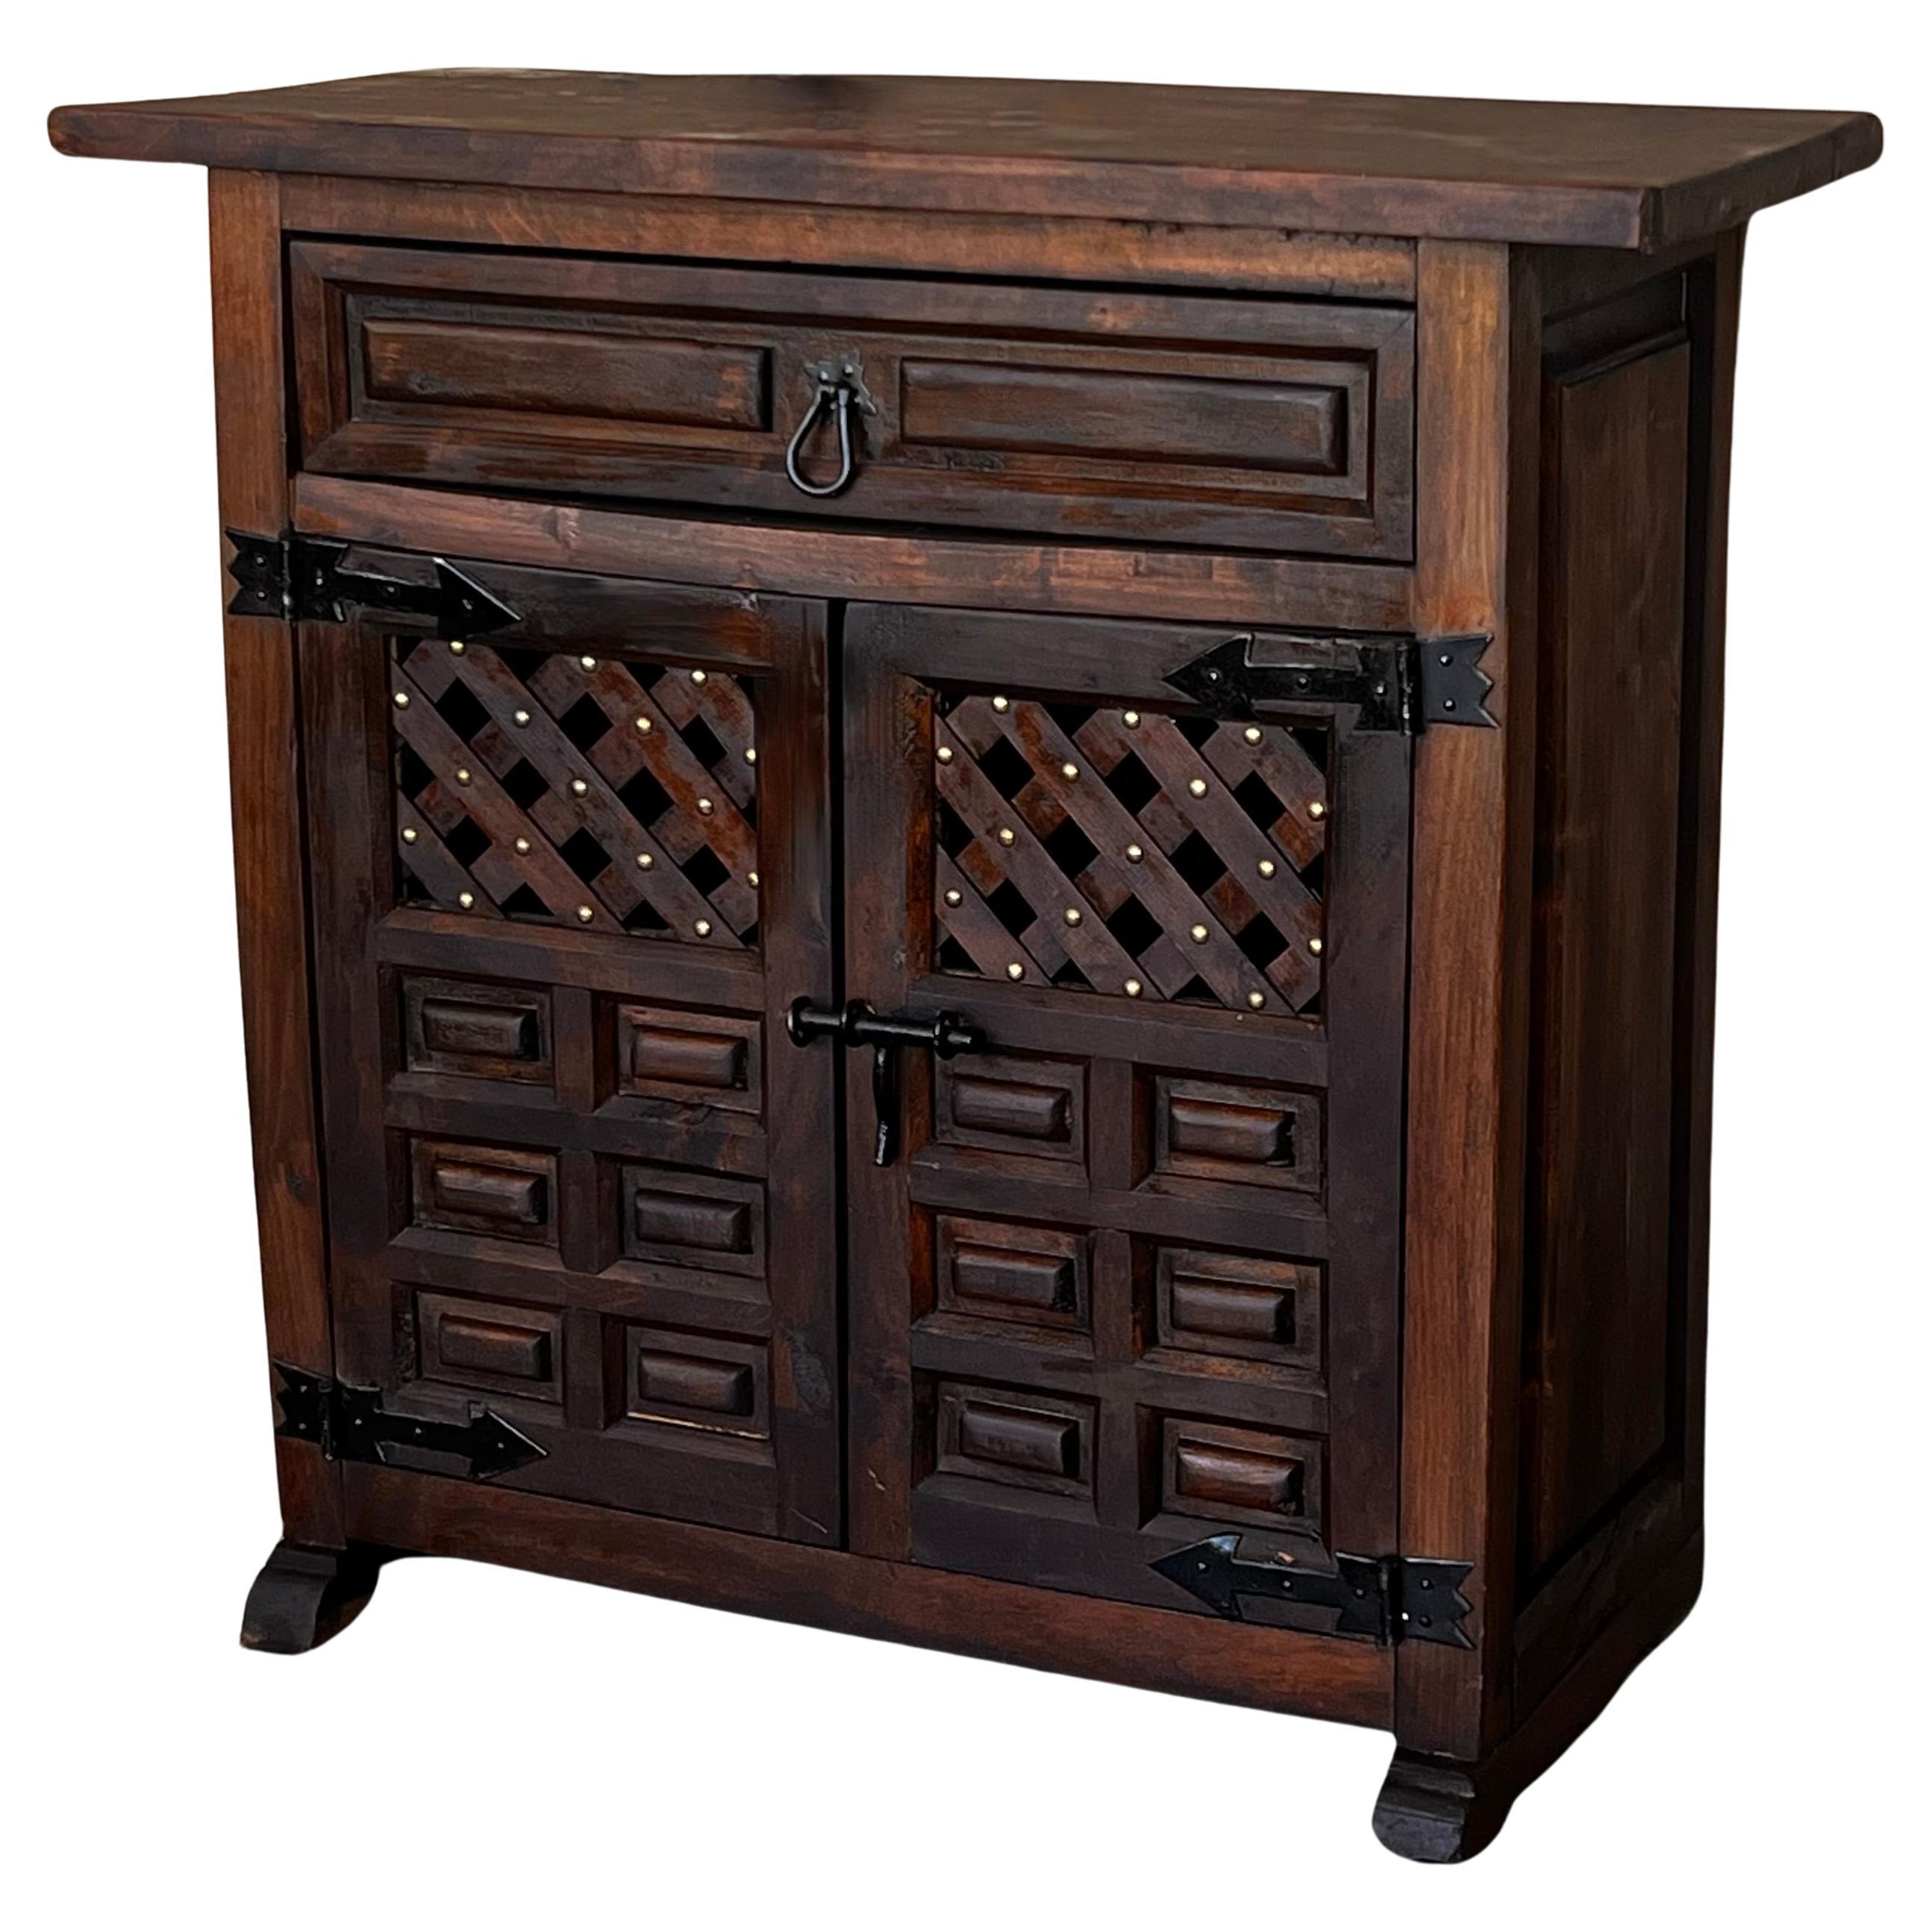 Spanish Carved Walnut Chest of Drawers, Nightstands or Narrow Console, 1920s